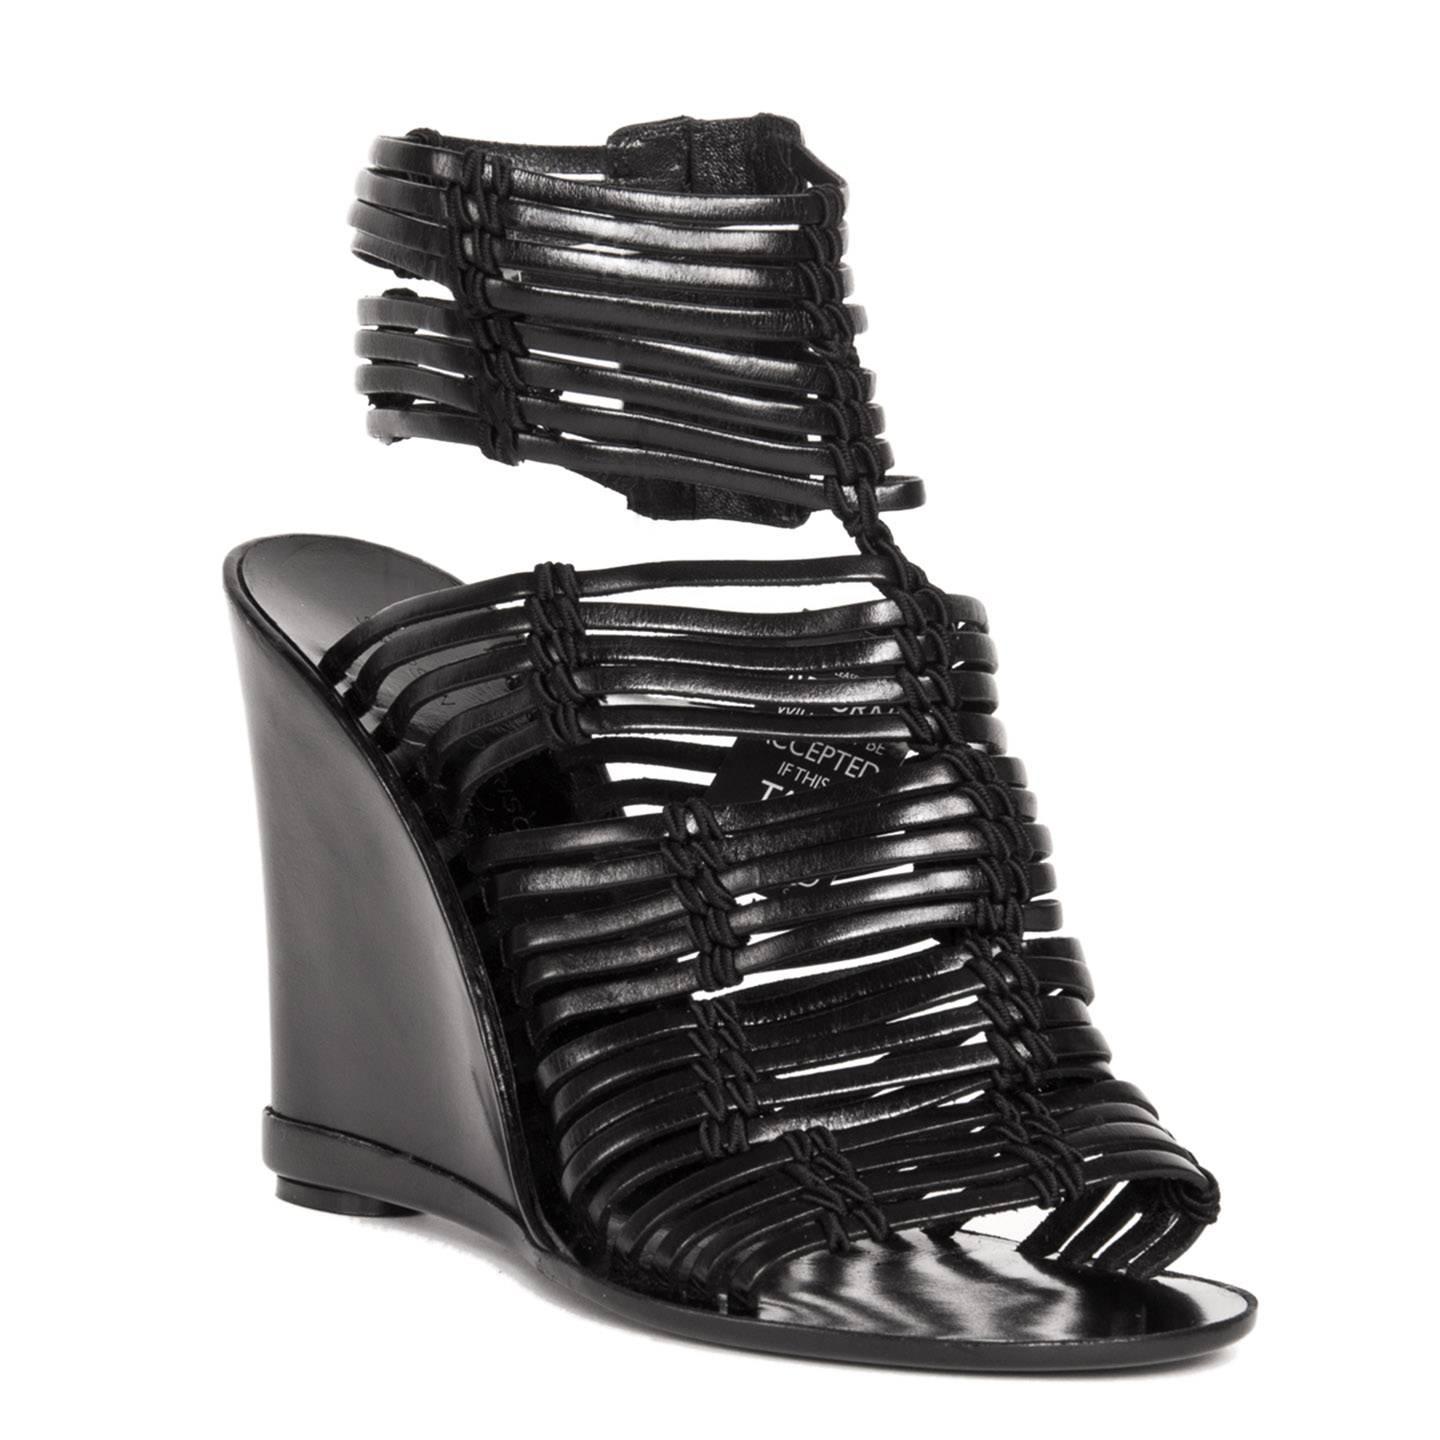 Black leather glove wedges created with thin stripes of black leather hold together to create wider stripes by black laces waved elegantly at front and sides. The ankle strap opens with a instep silver metal zipper. Wedges heel 4.5